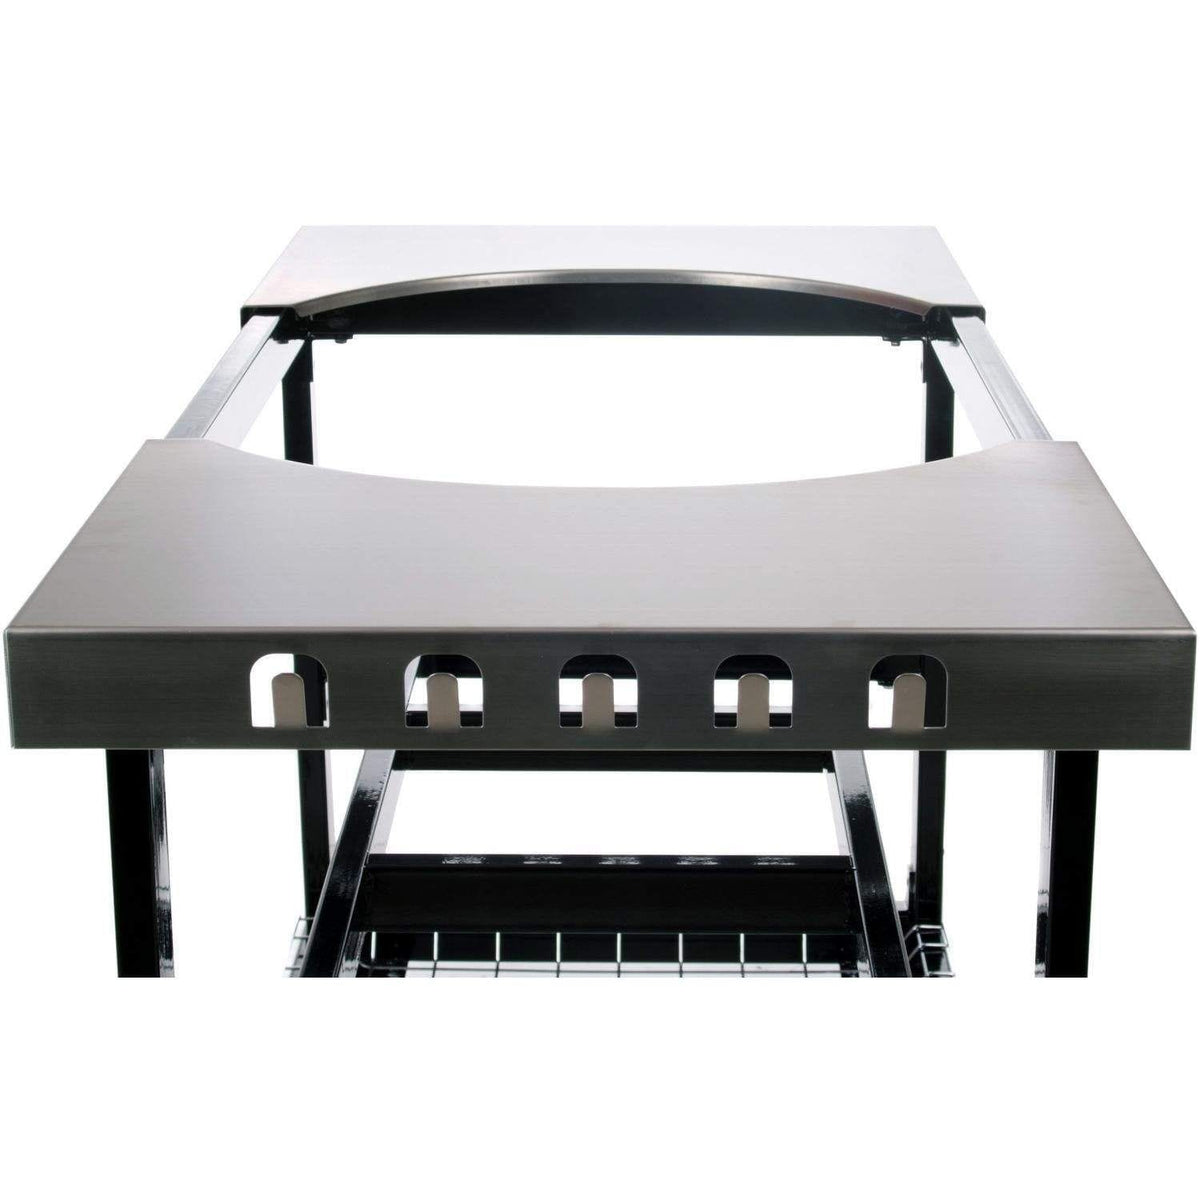 Primo Accessories Primo Cart Base with Basket and SS Side Shelves for Oval LG 300, Oval XL 400, or Oval JR 200 / PG00370 or PG00320